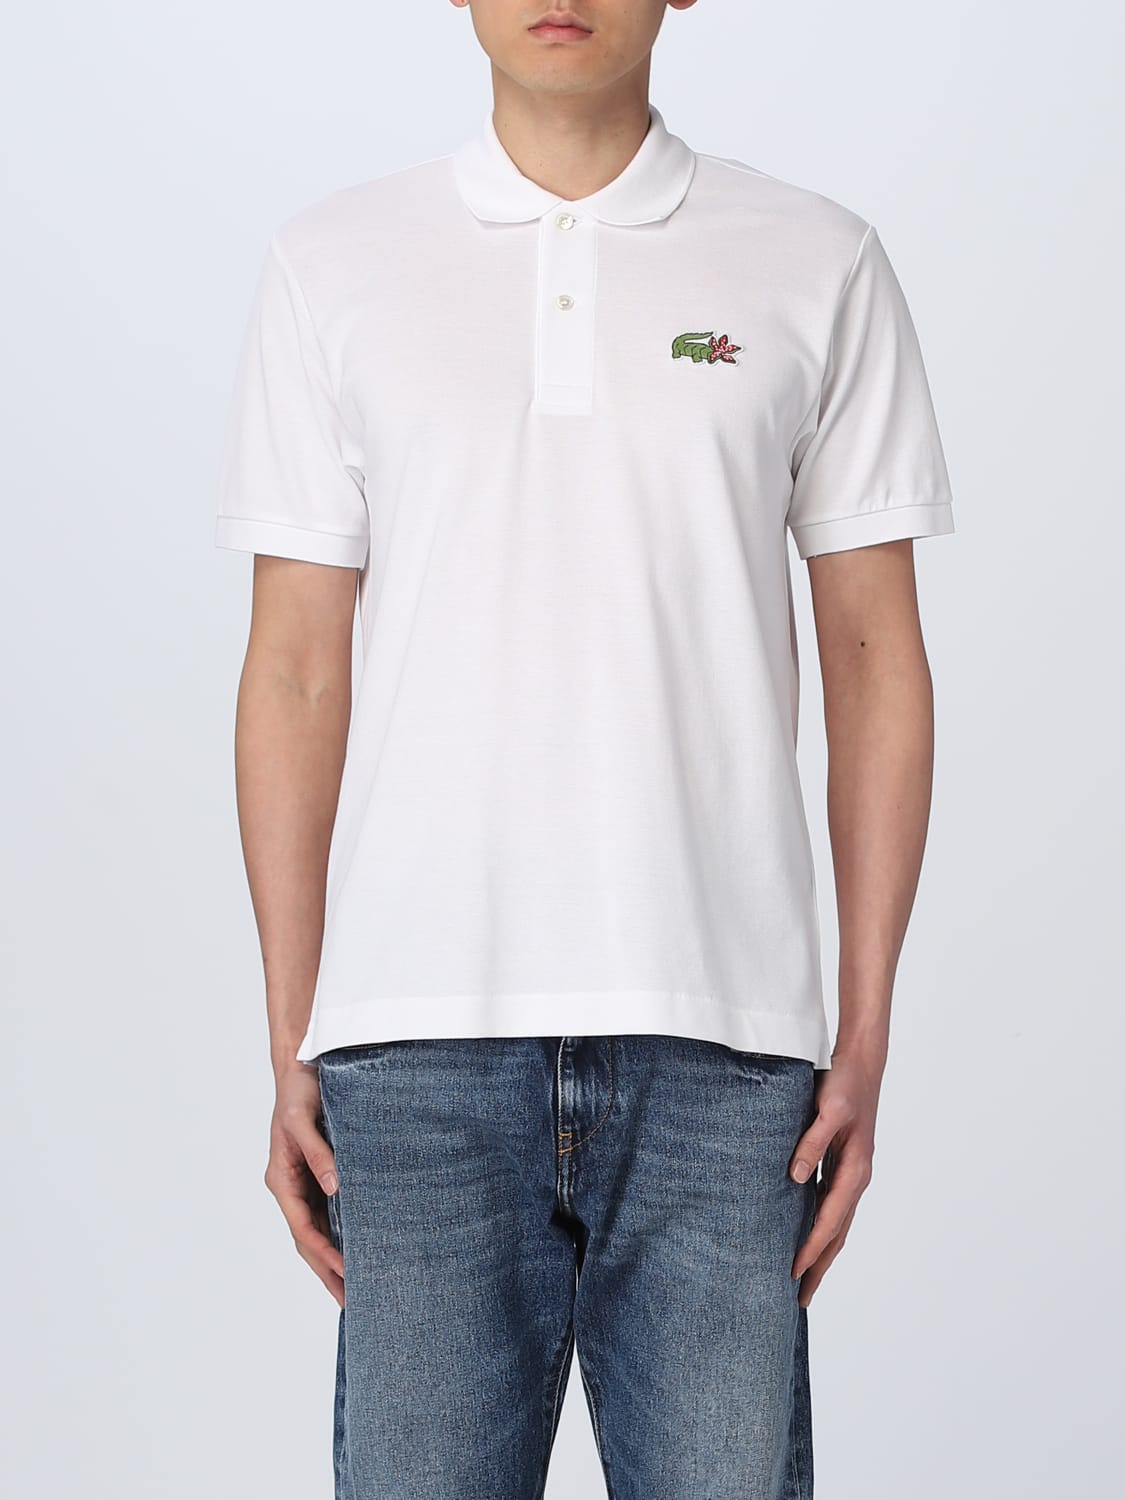 Stat Banzai Afståelse Lacoste X Netflix Outlet: polo shirt for man - White | Lacoste X Netflix  polo shirt PH7057 online at GIGLIO.COM